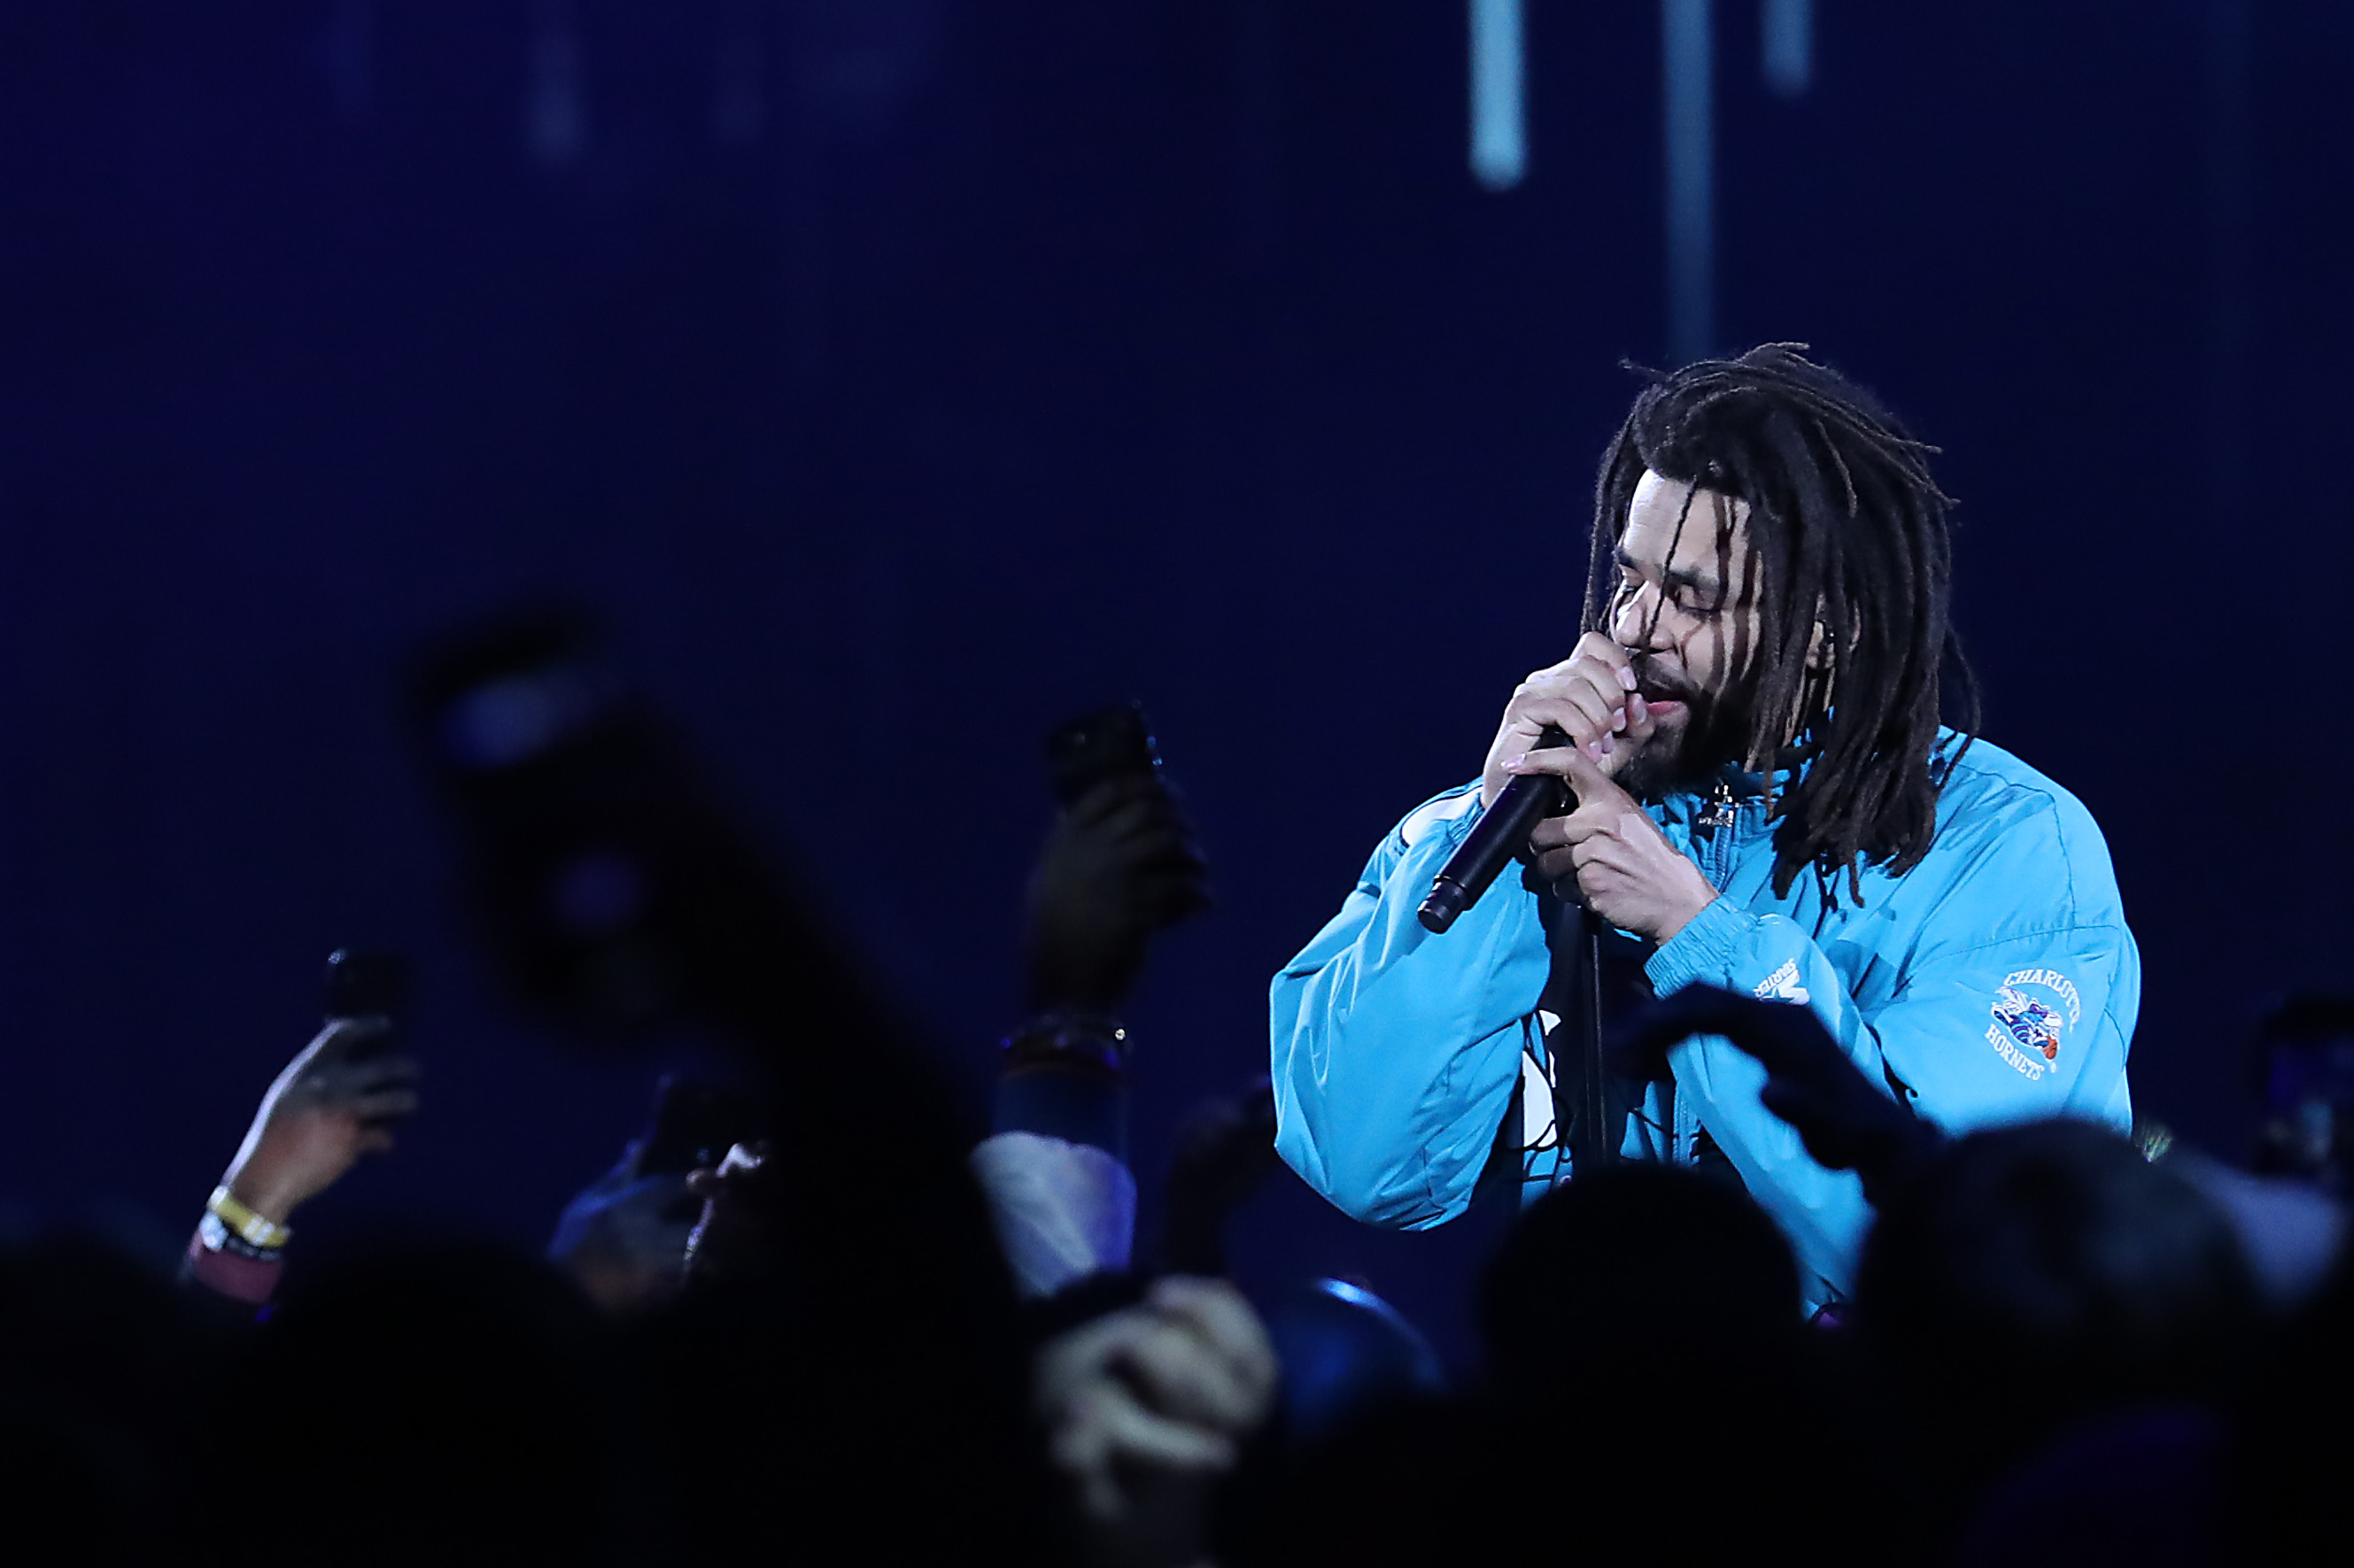 Grammys 2020: 21 Savage and J. Cole Win Best Rap Song for “a lot”